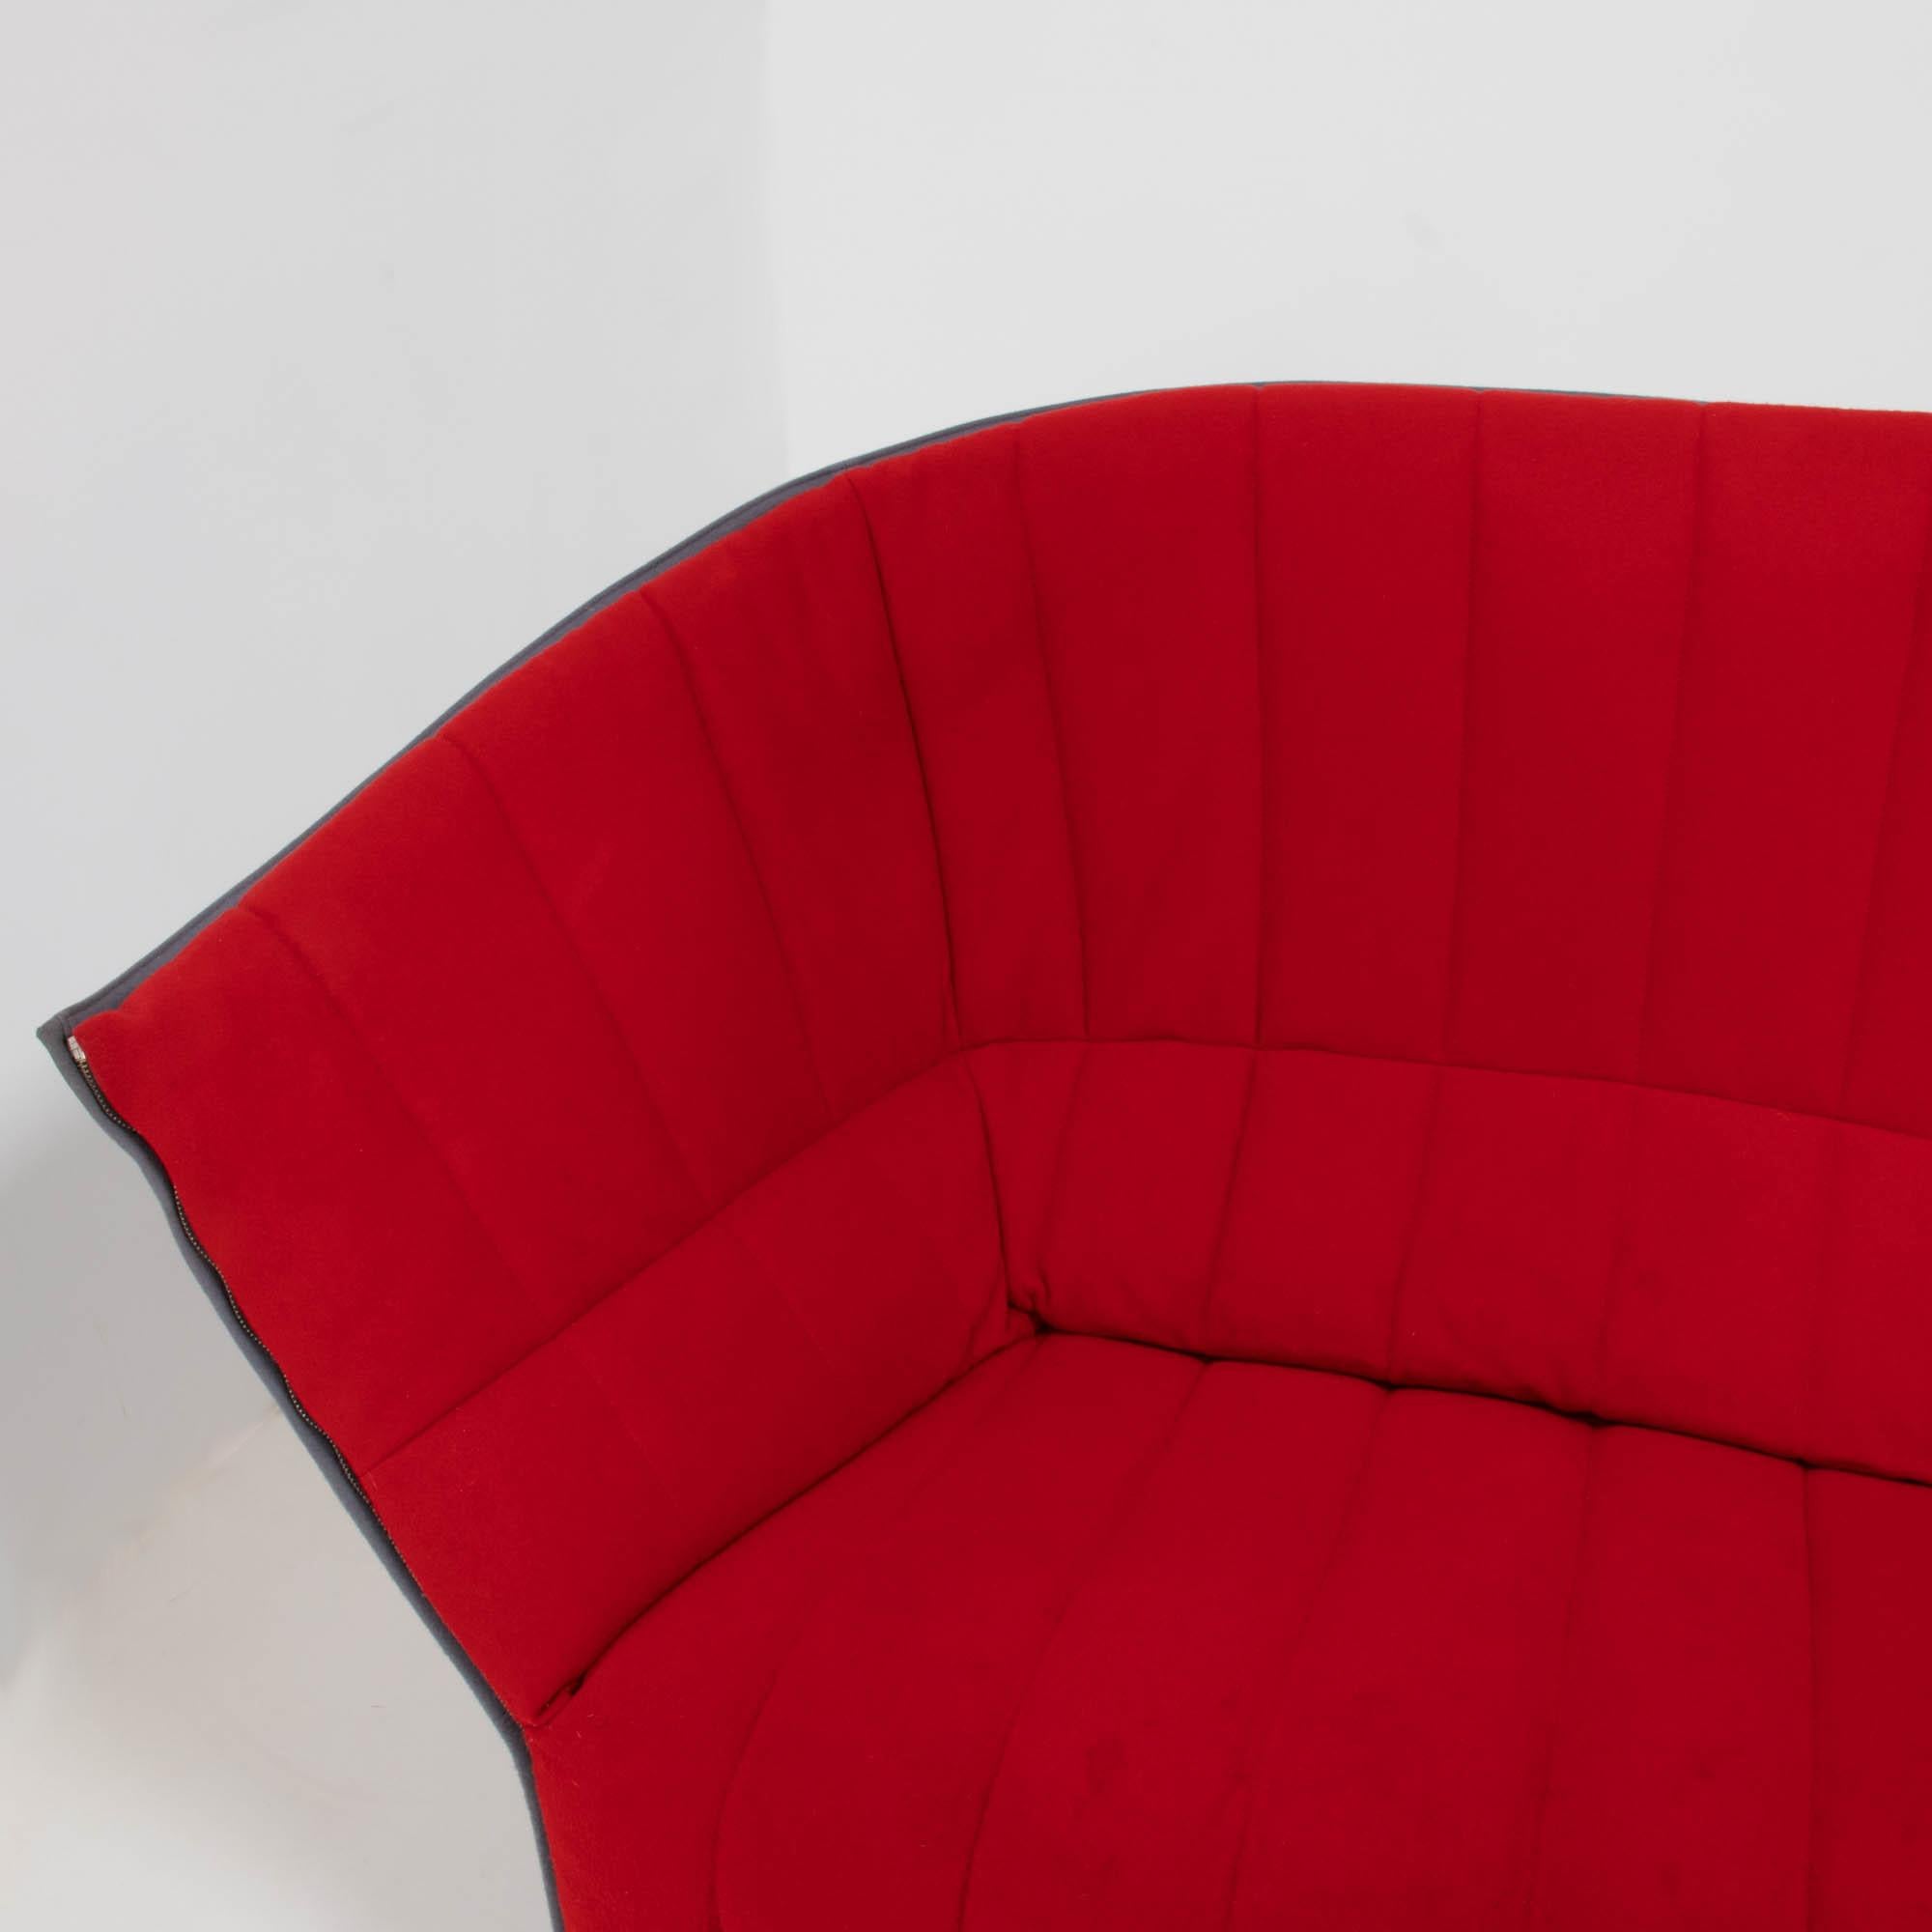 Contemporary Ligne Roset by Inga Sempé Moel Red and Grey Quilted Loveseat Sofa, 2007 For Sale